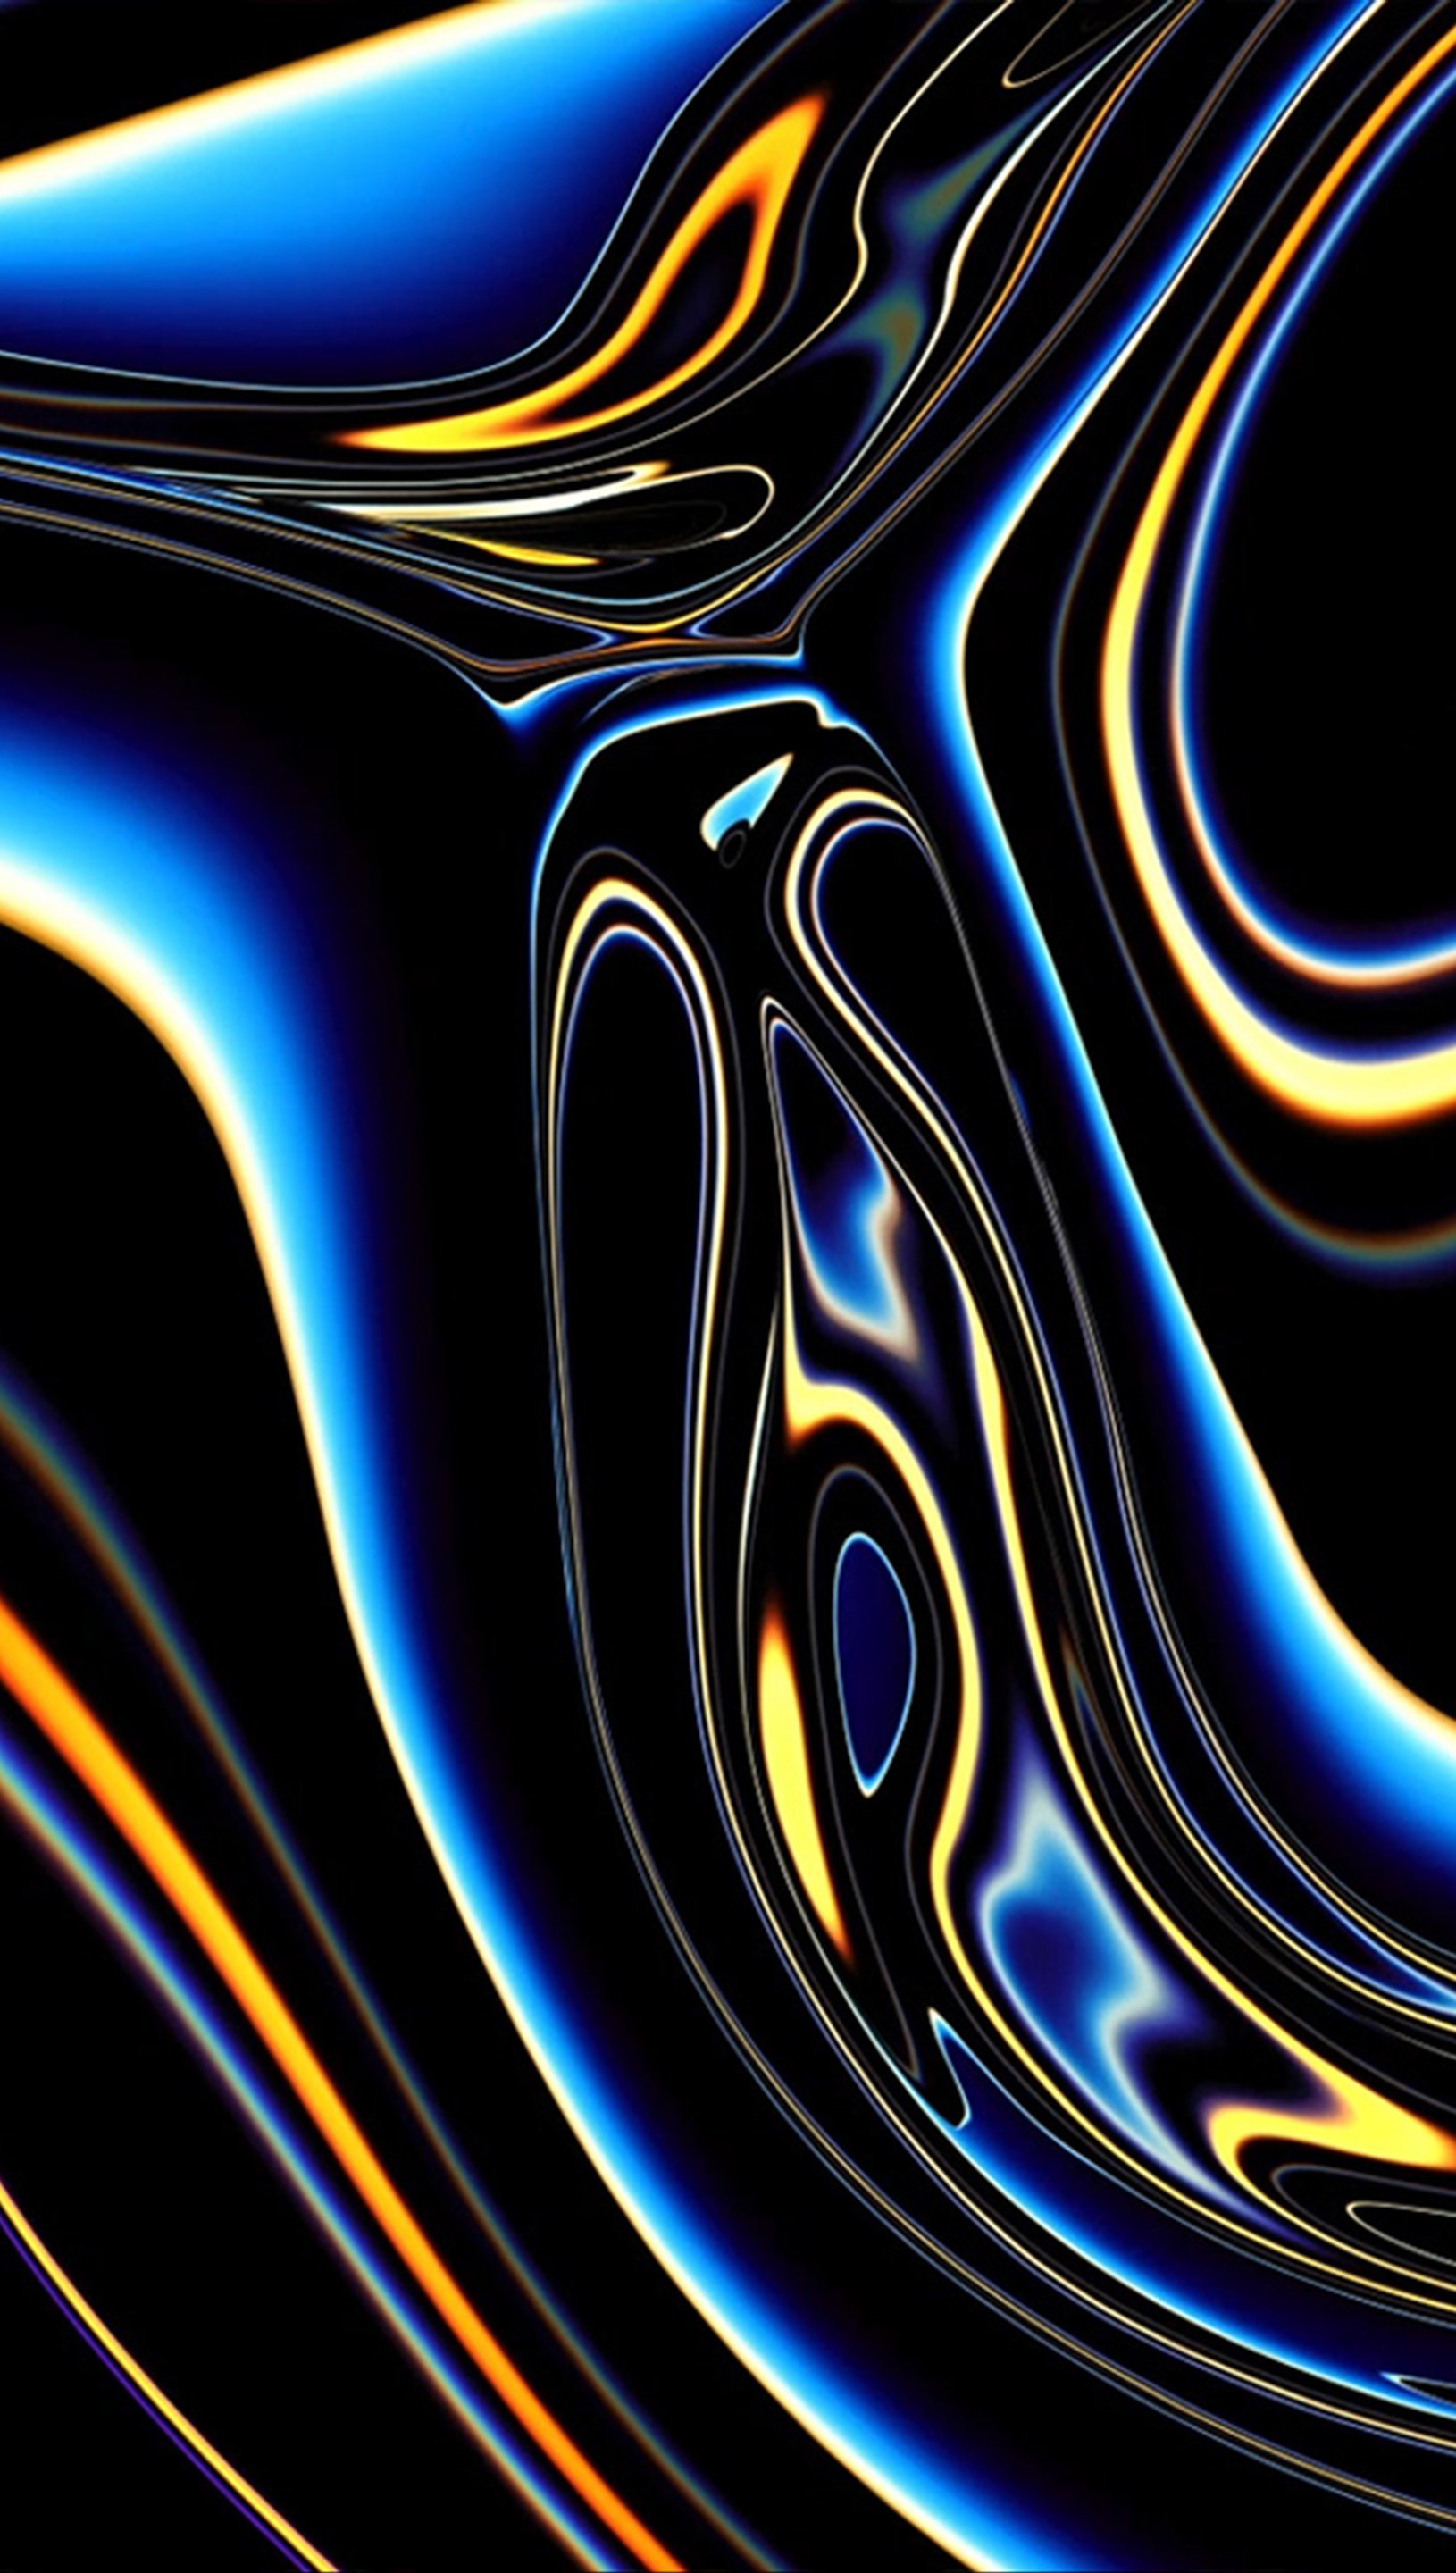 Apple Pro Display XDR Abstract